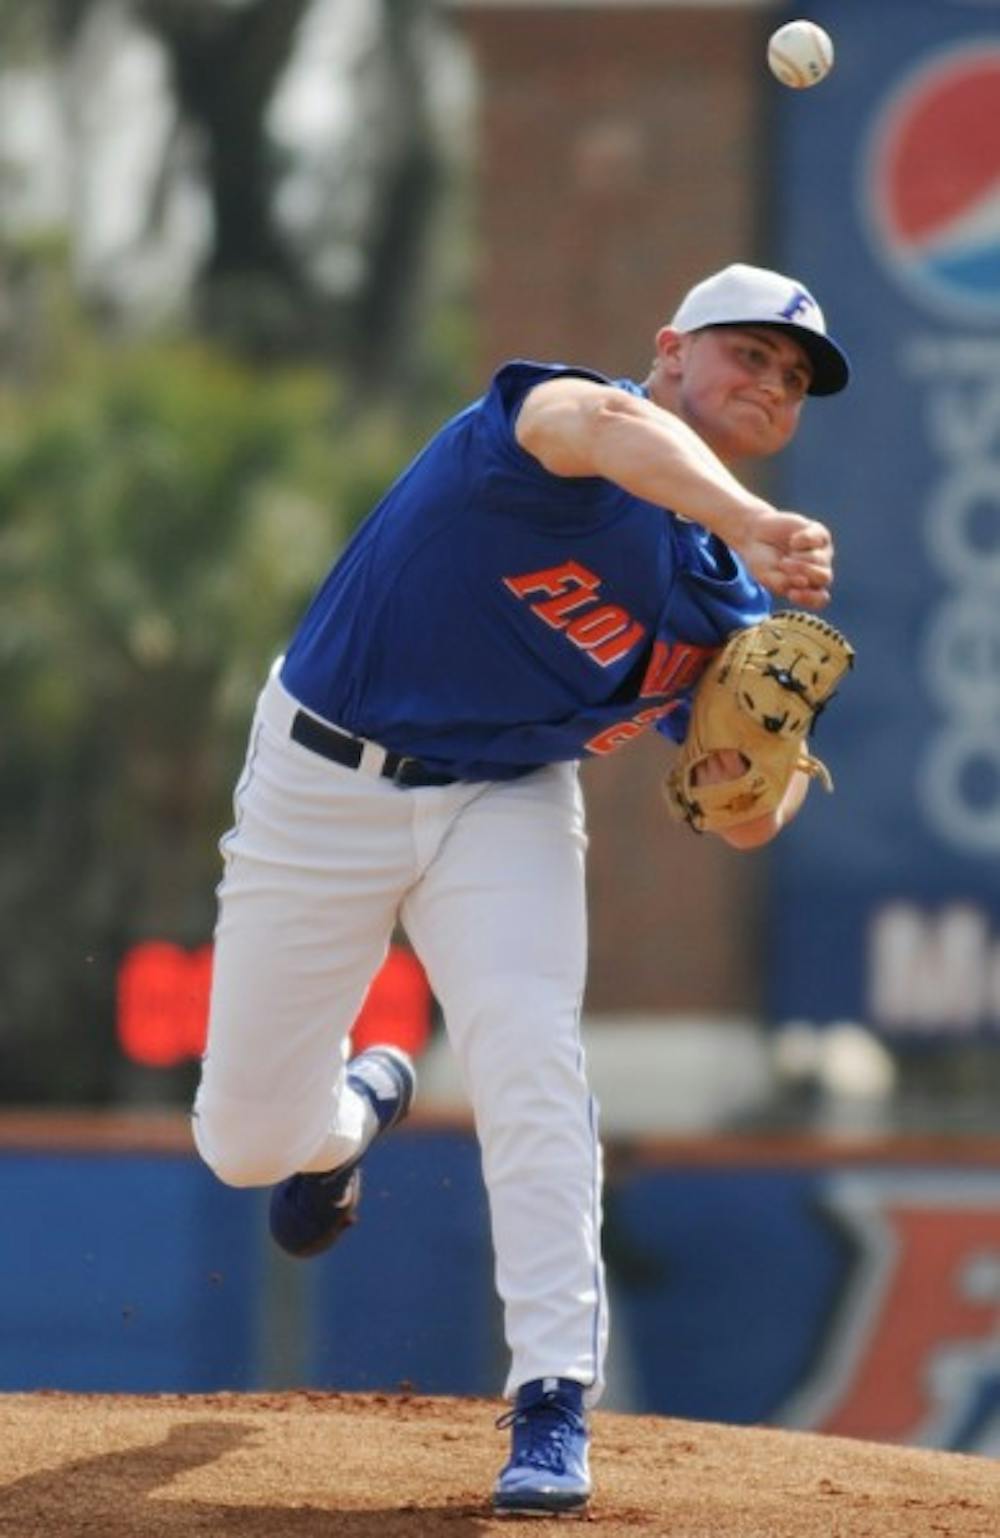 <p>Karsten Whitson pitches during UF’s 5-0 win against USF on Feb. 20, 2011. Whitson missed the entire 2013 season after undergoing shoulder surgery in February 2013.</p>